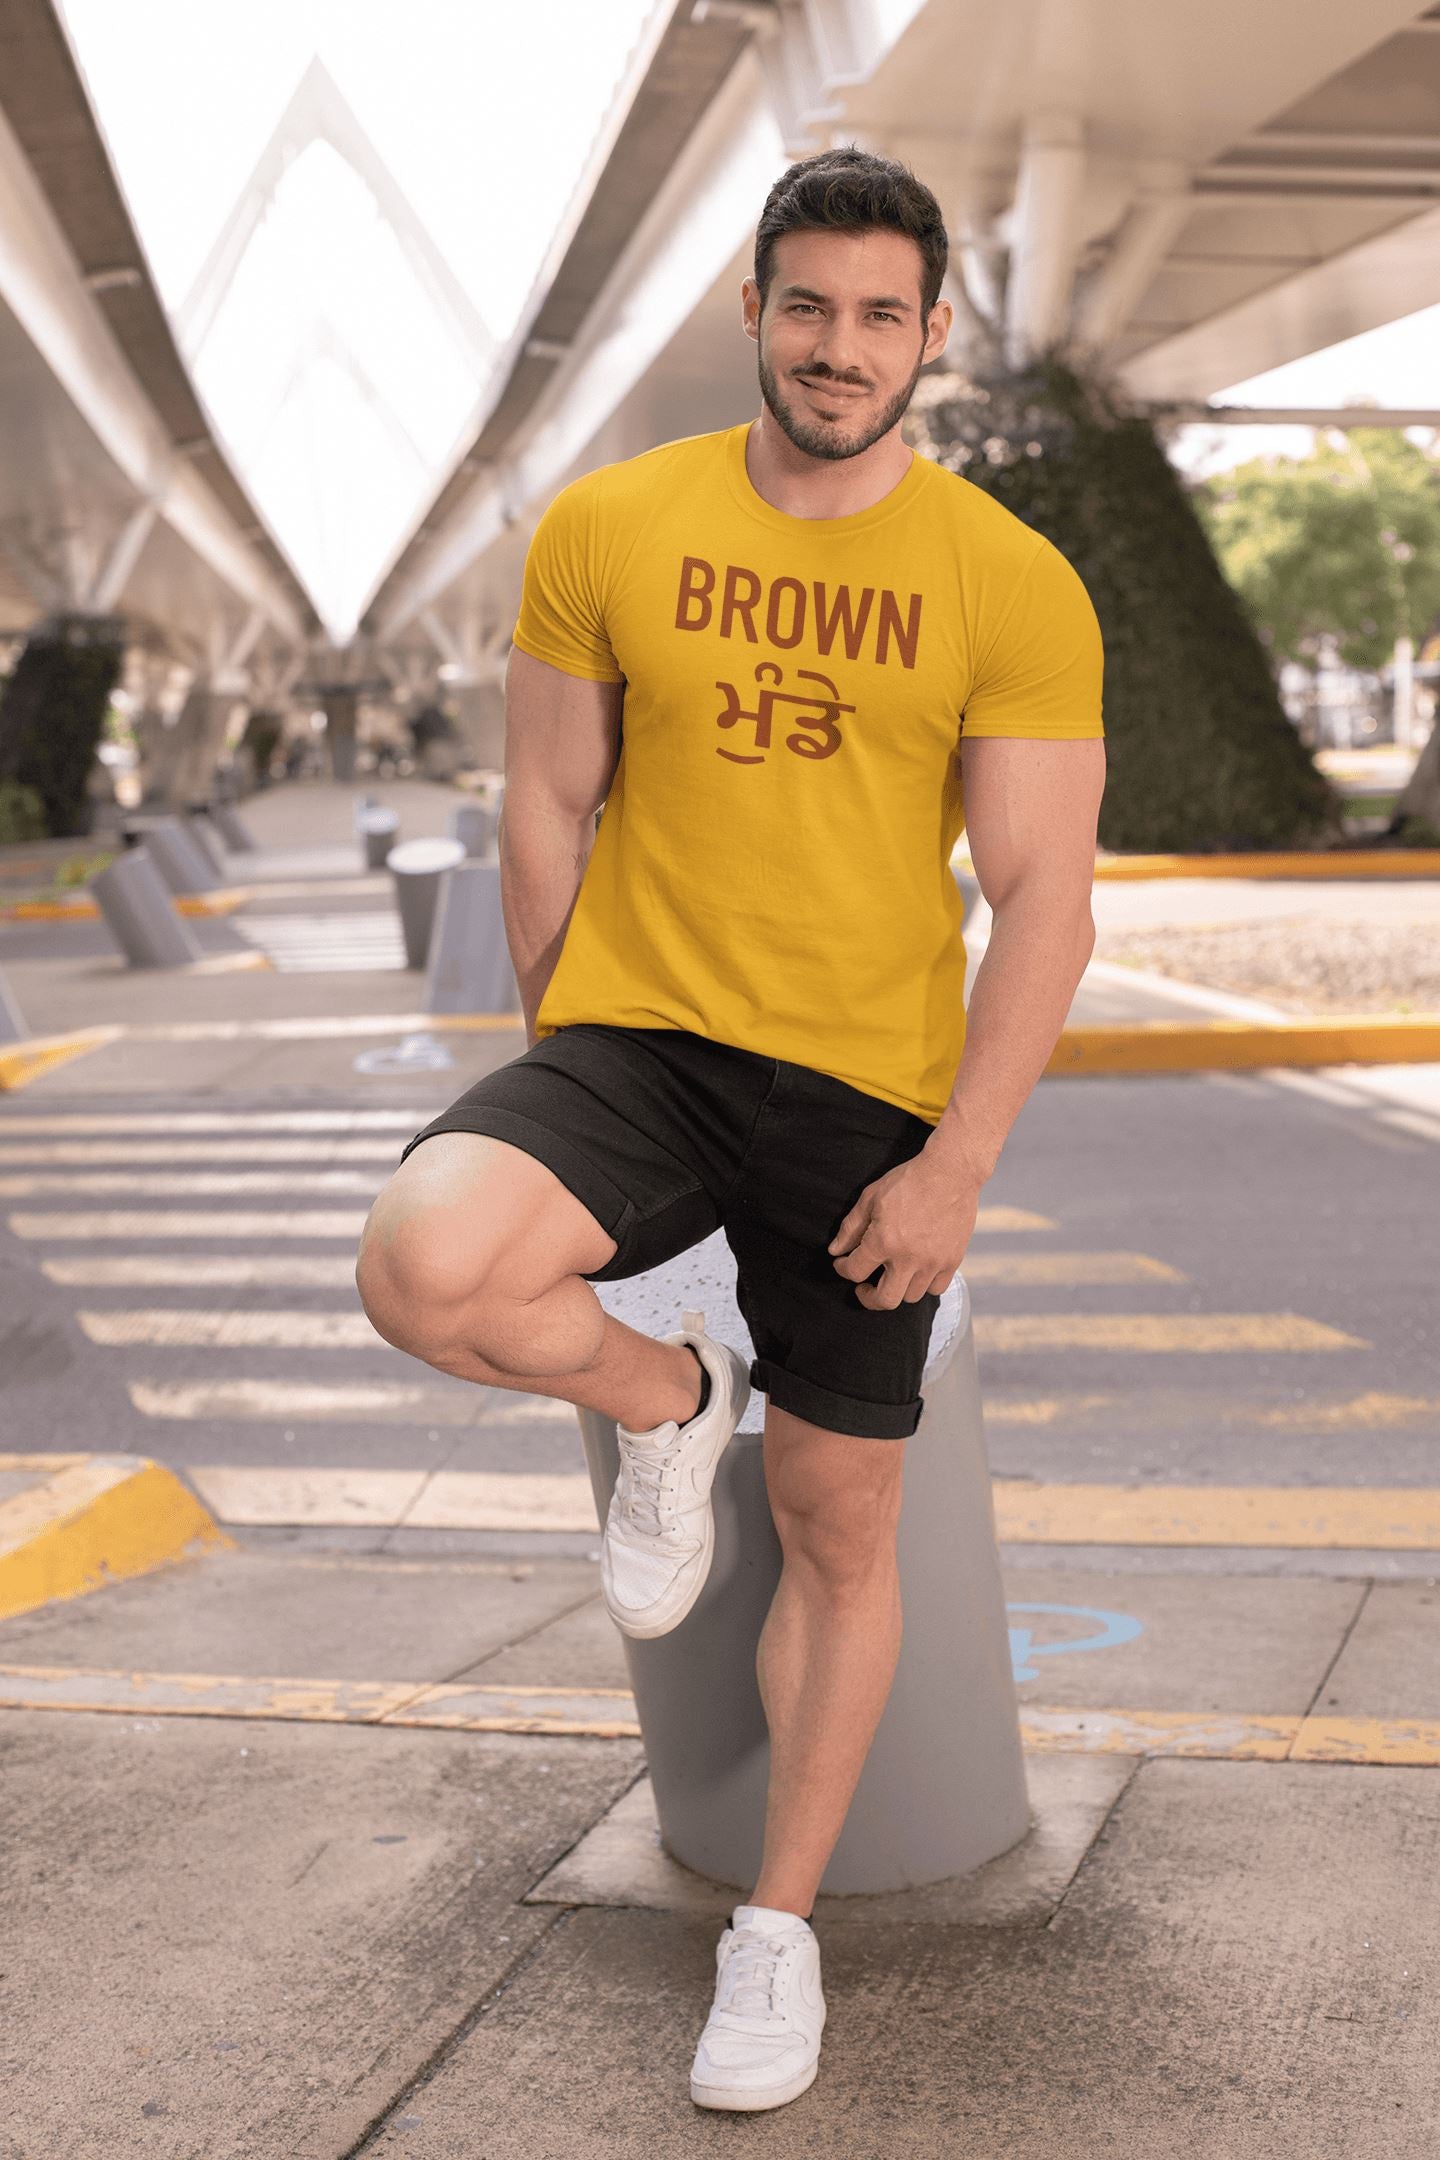 Brown Munde Exclusive T Shirt for Indian Men | Premium Design | Catch My Drift India - Catch My Drift India  brown, clothing, desi, funny, general, gym, indian, made in india, munde, shirt, t